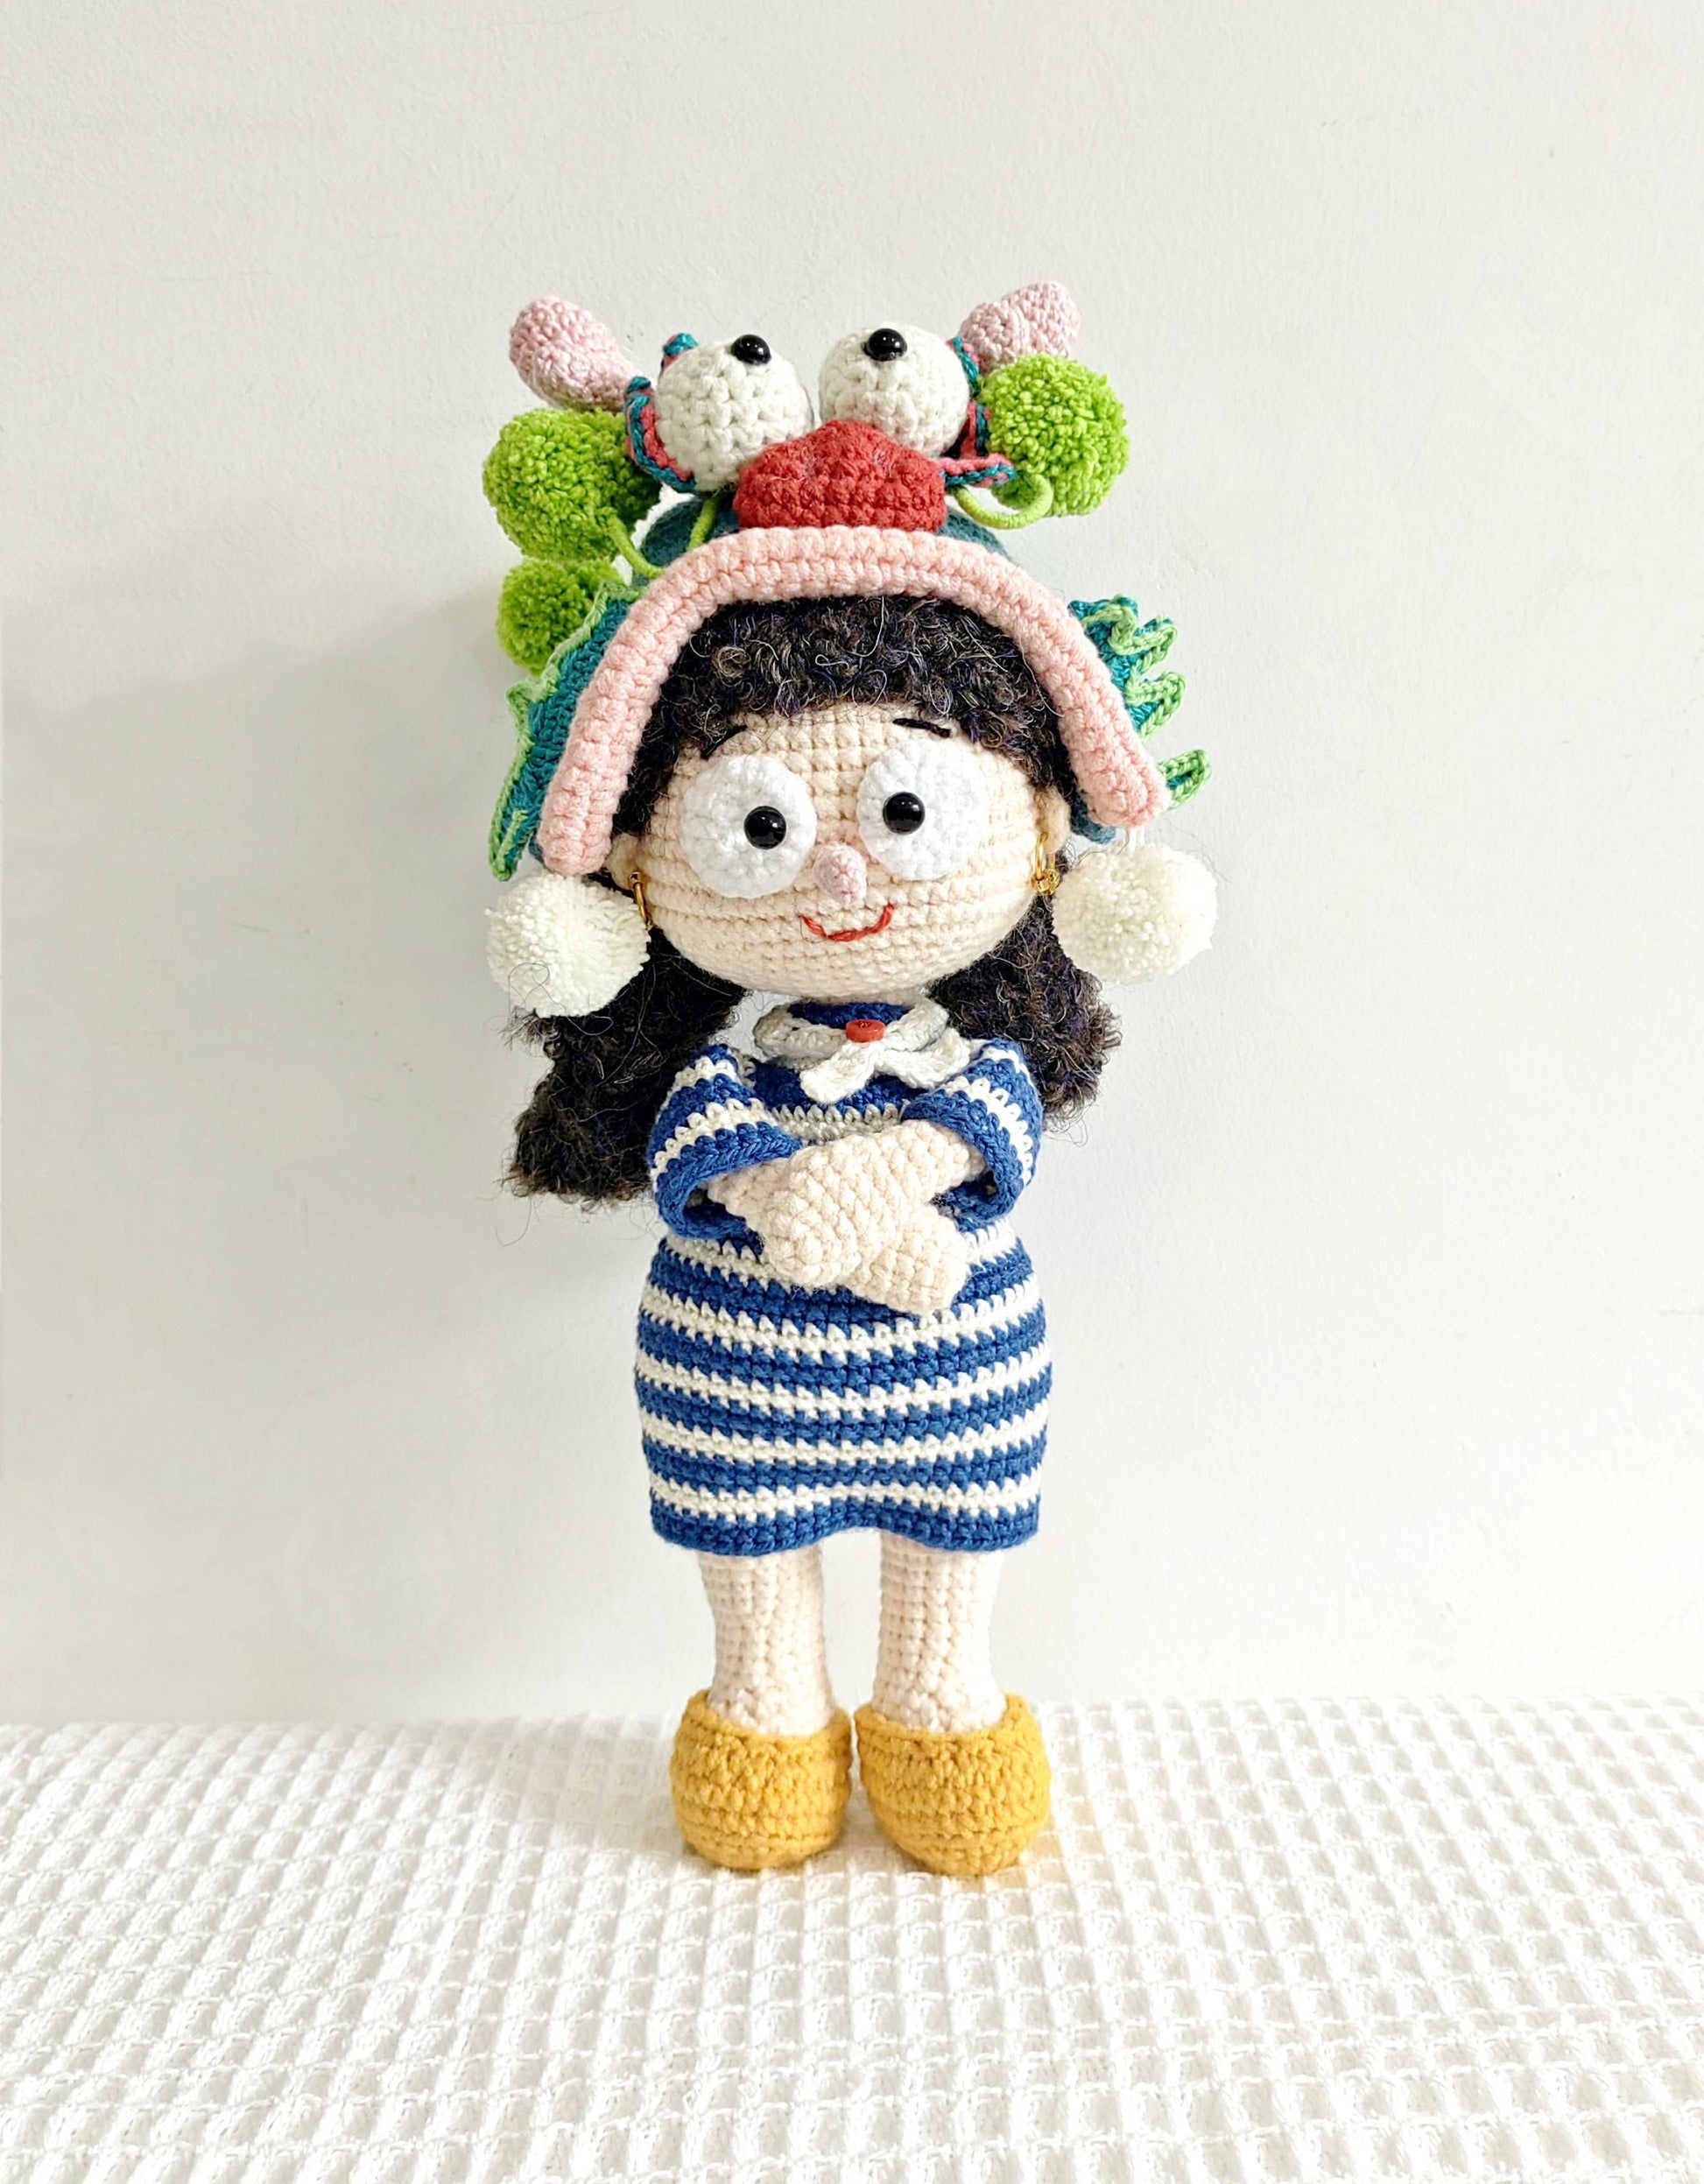 Handcrafted Amigurumi Doll Decor for Special Occasions